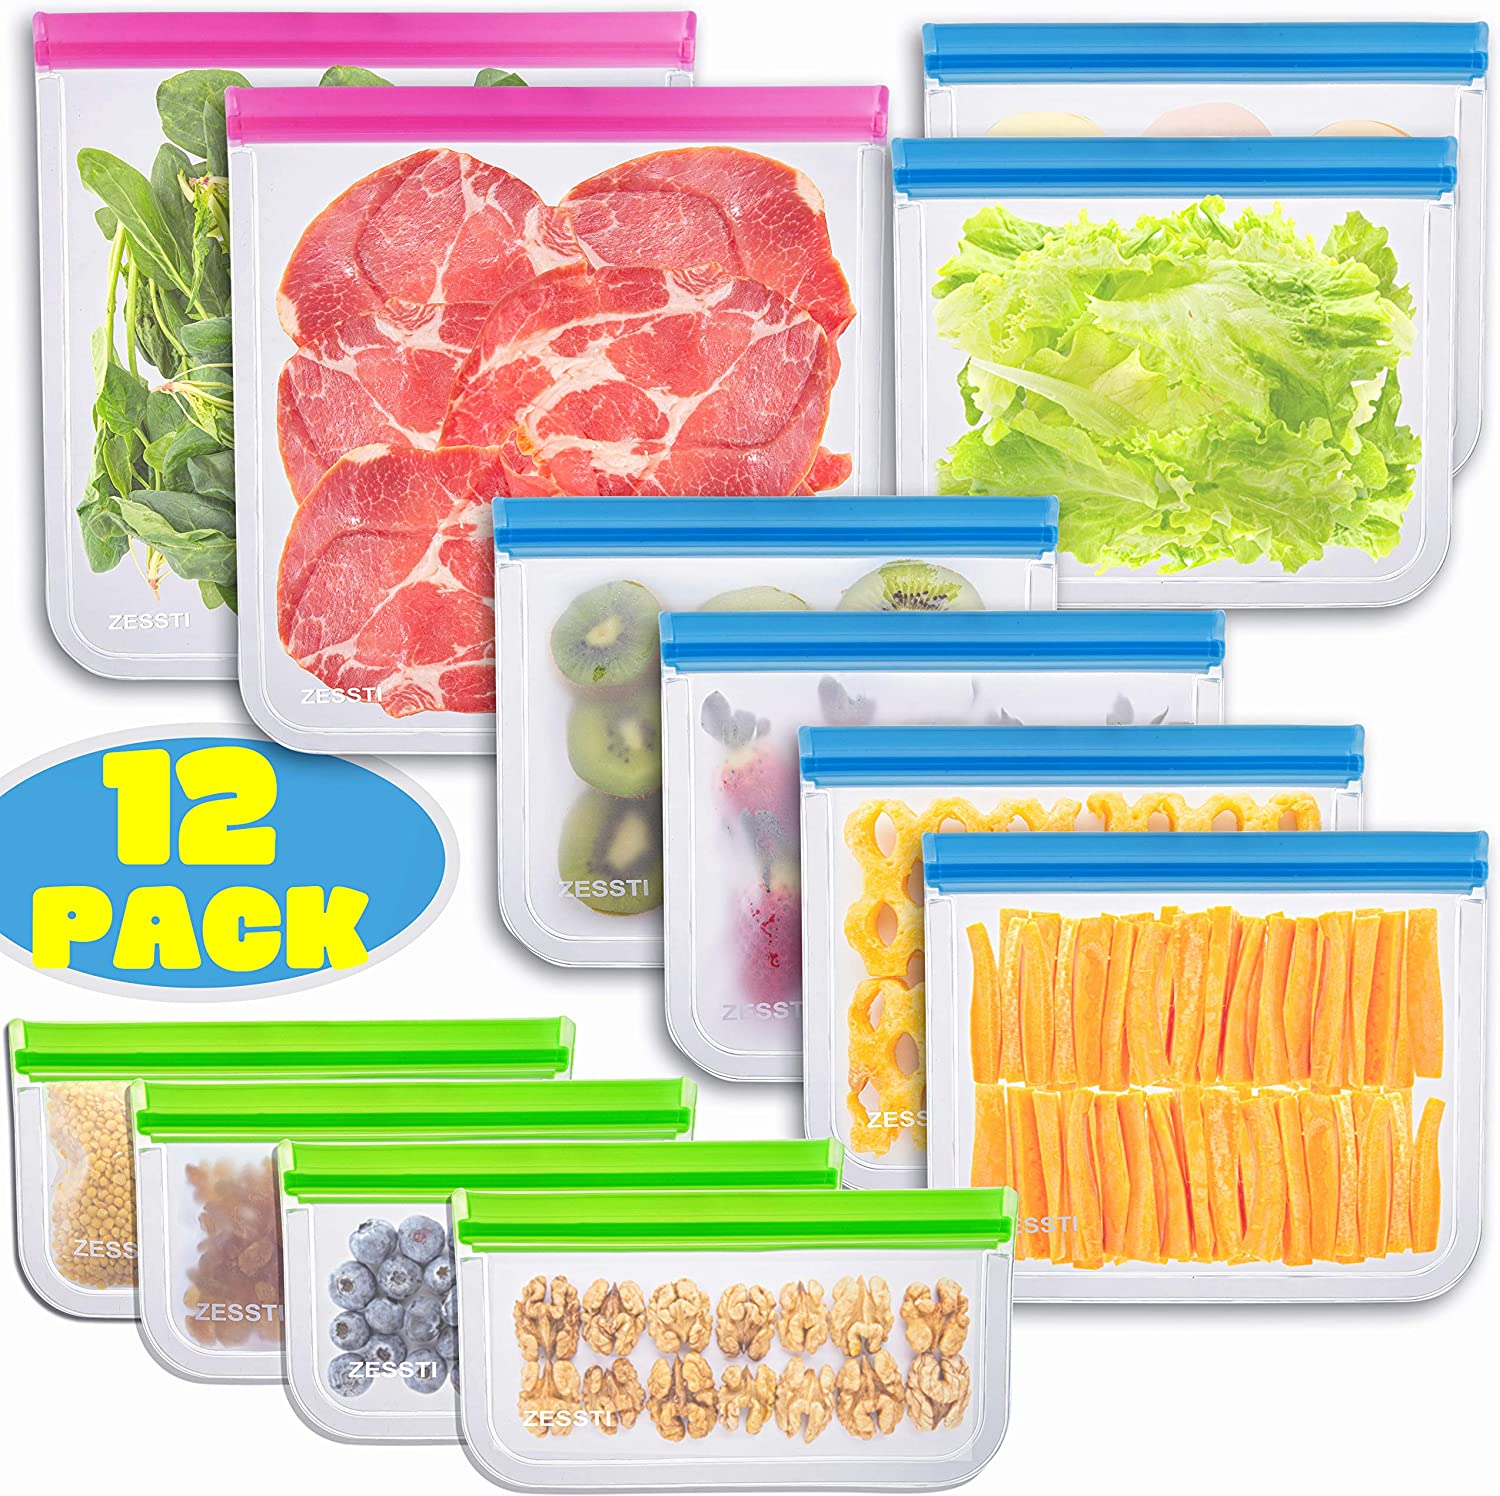 IDEATECH Leakproof Silicone Food Storage Bags, 20-Pack